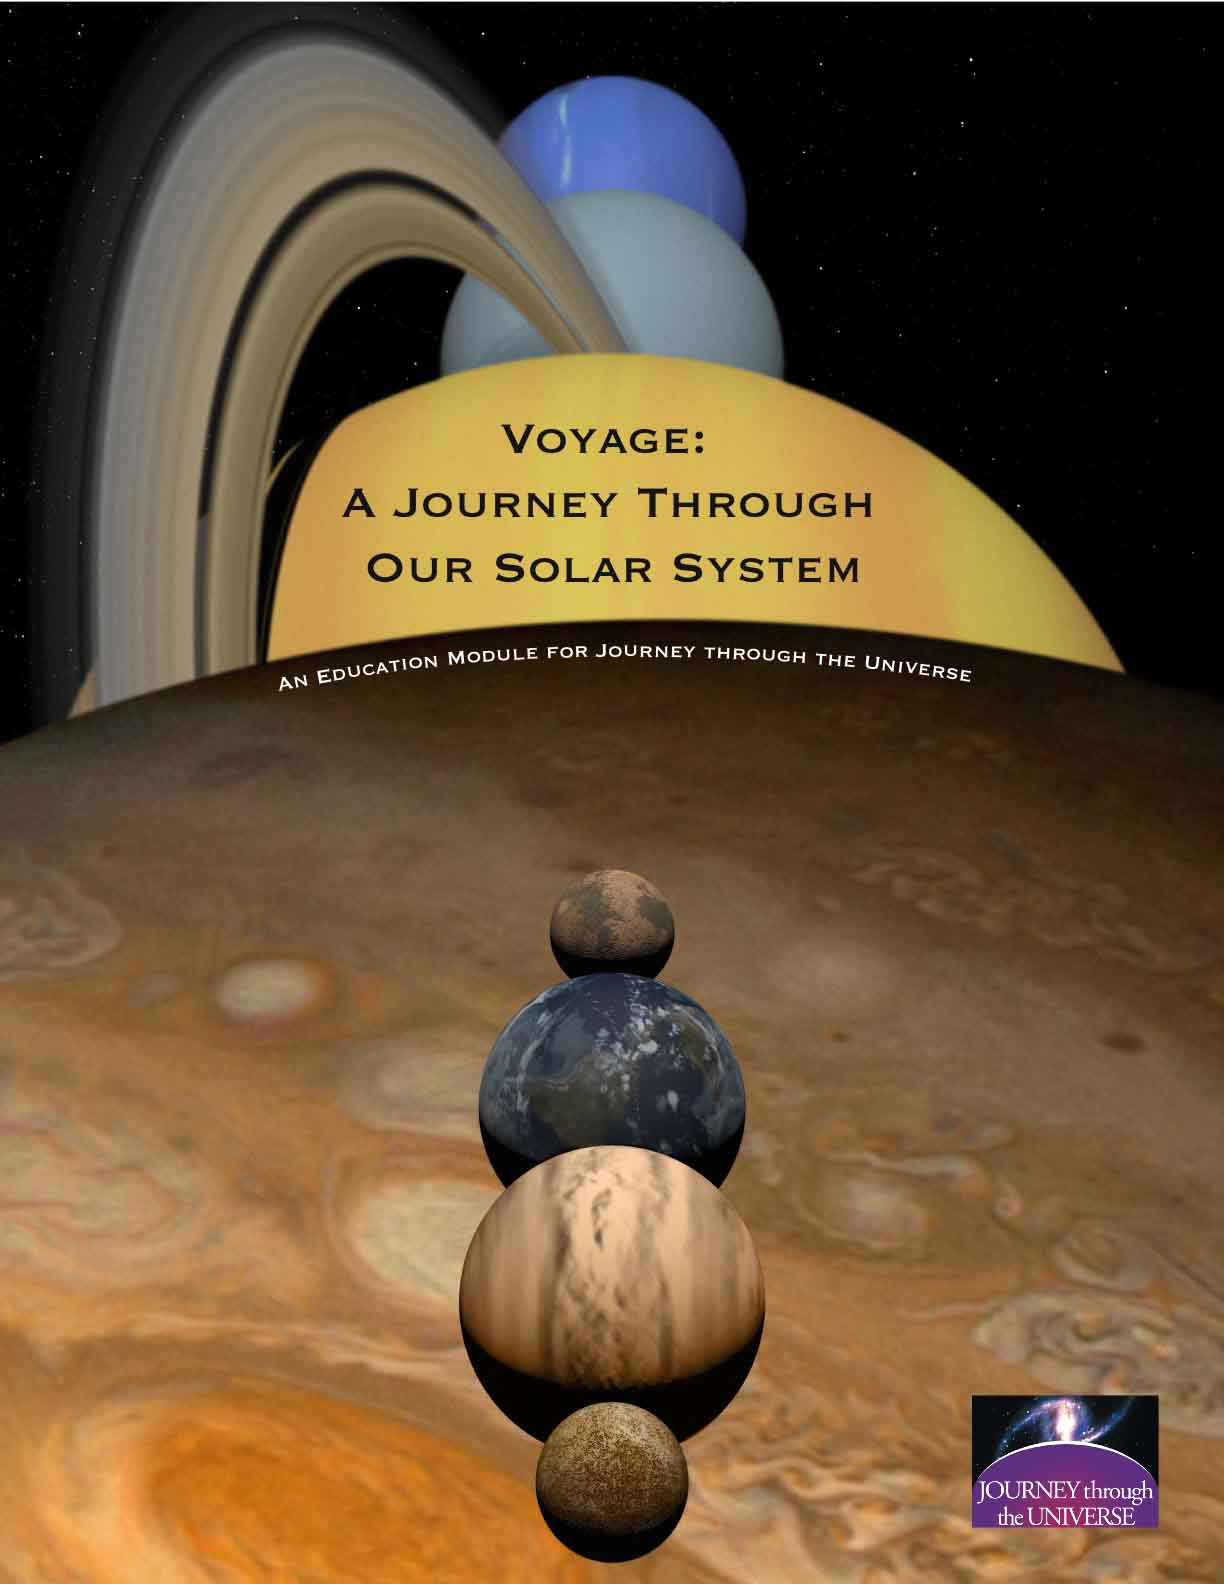 The Grade K-12 Voyage Education Module—a compendium of lessons on Solar System science developed for the Voyage National Program. Click on Image for Details